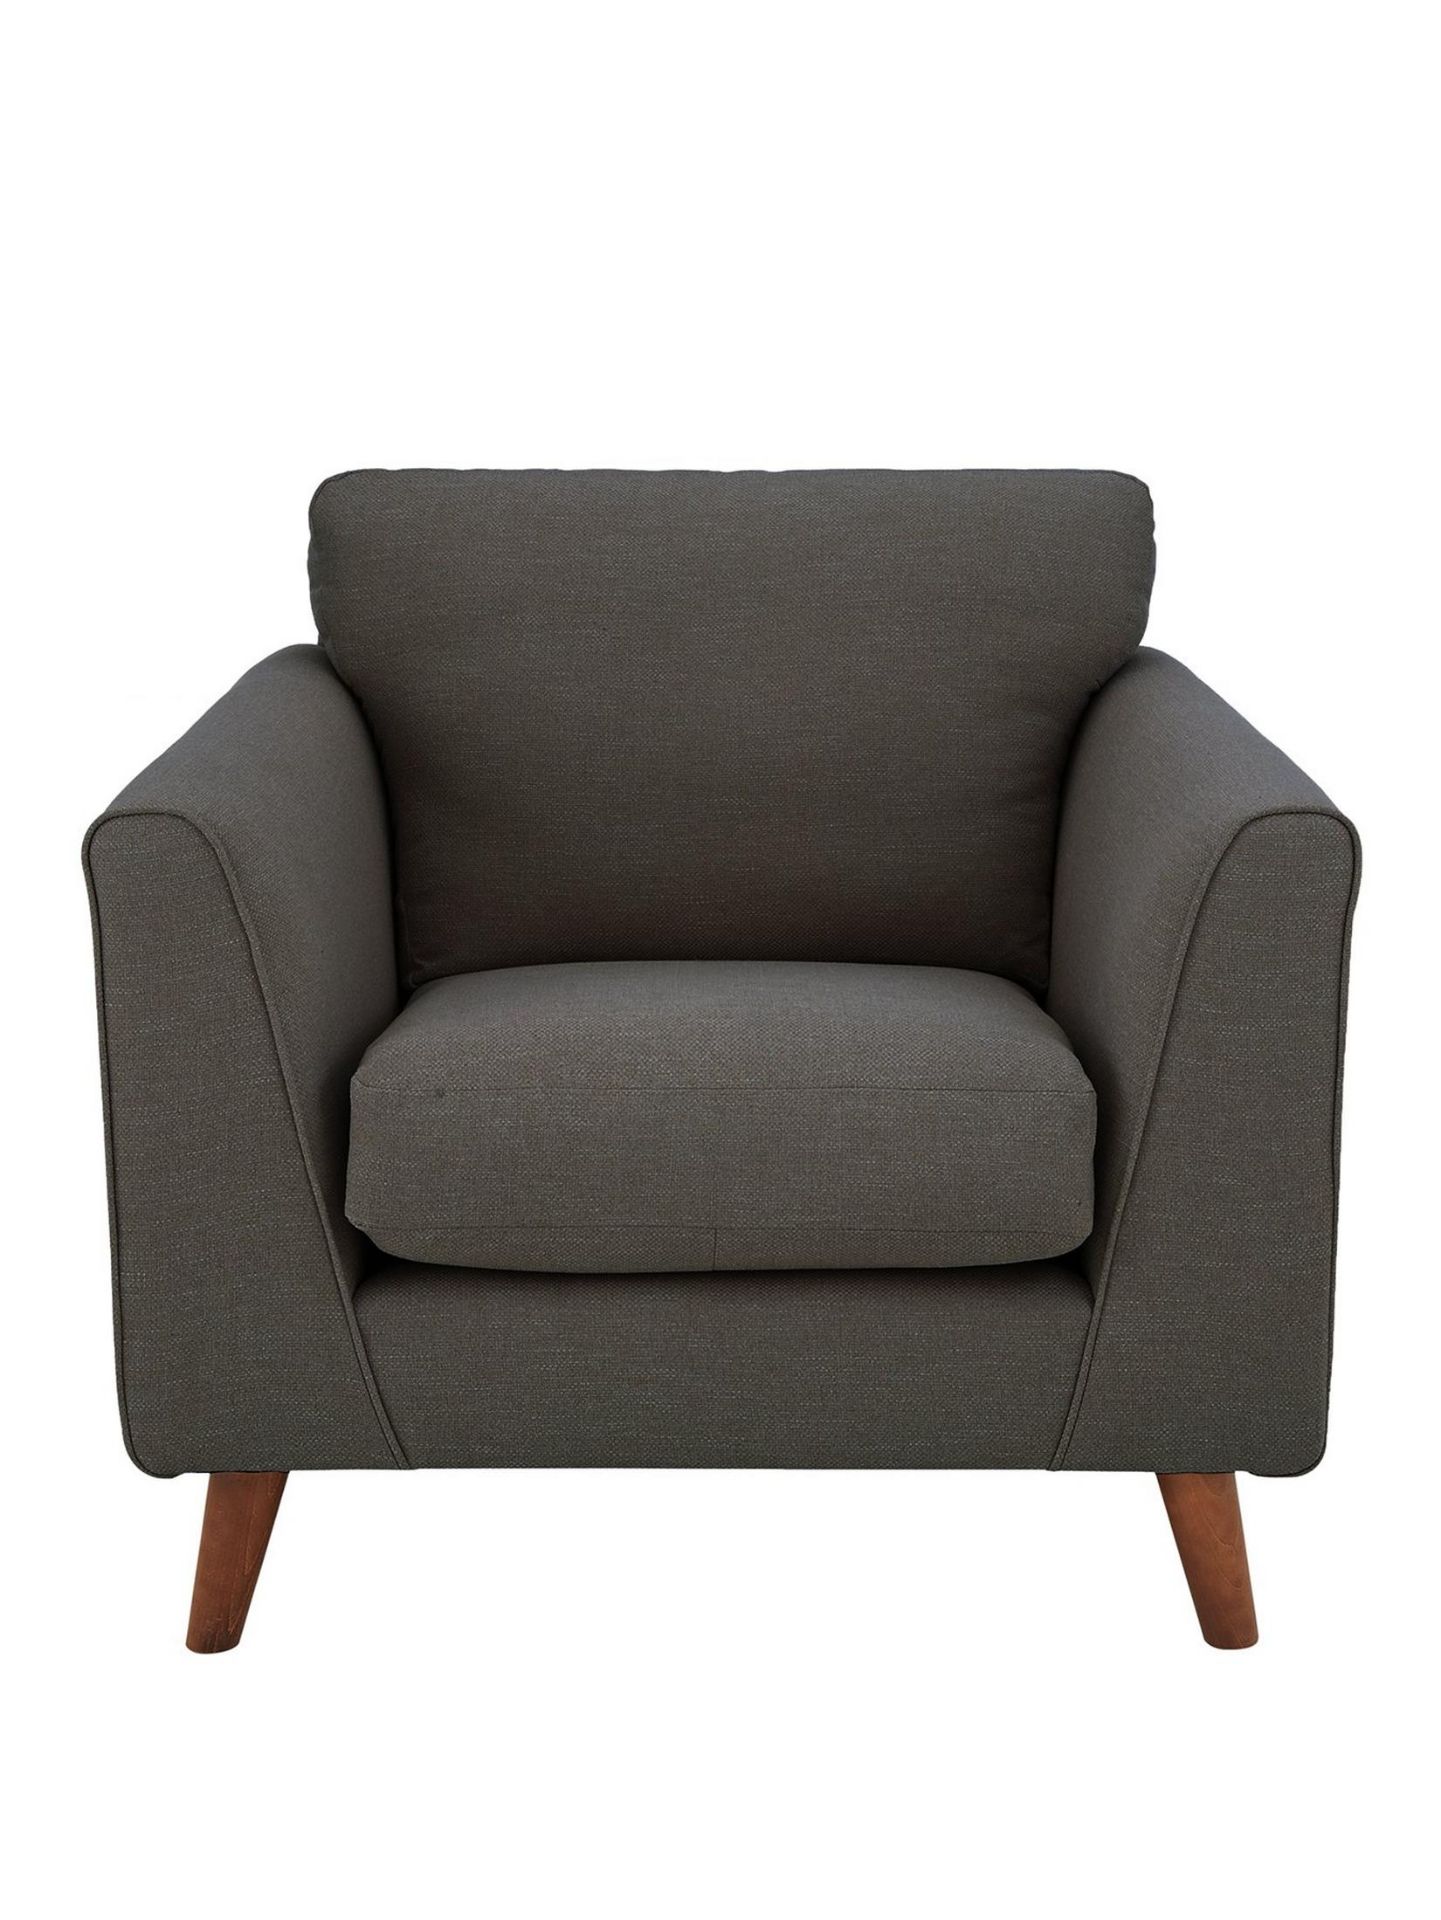 Otis Armchair. RPP £579.00. Dimensions: Height 90.5, Width 96, Depth 90 cm Assembly: Part - Image 3 of 3